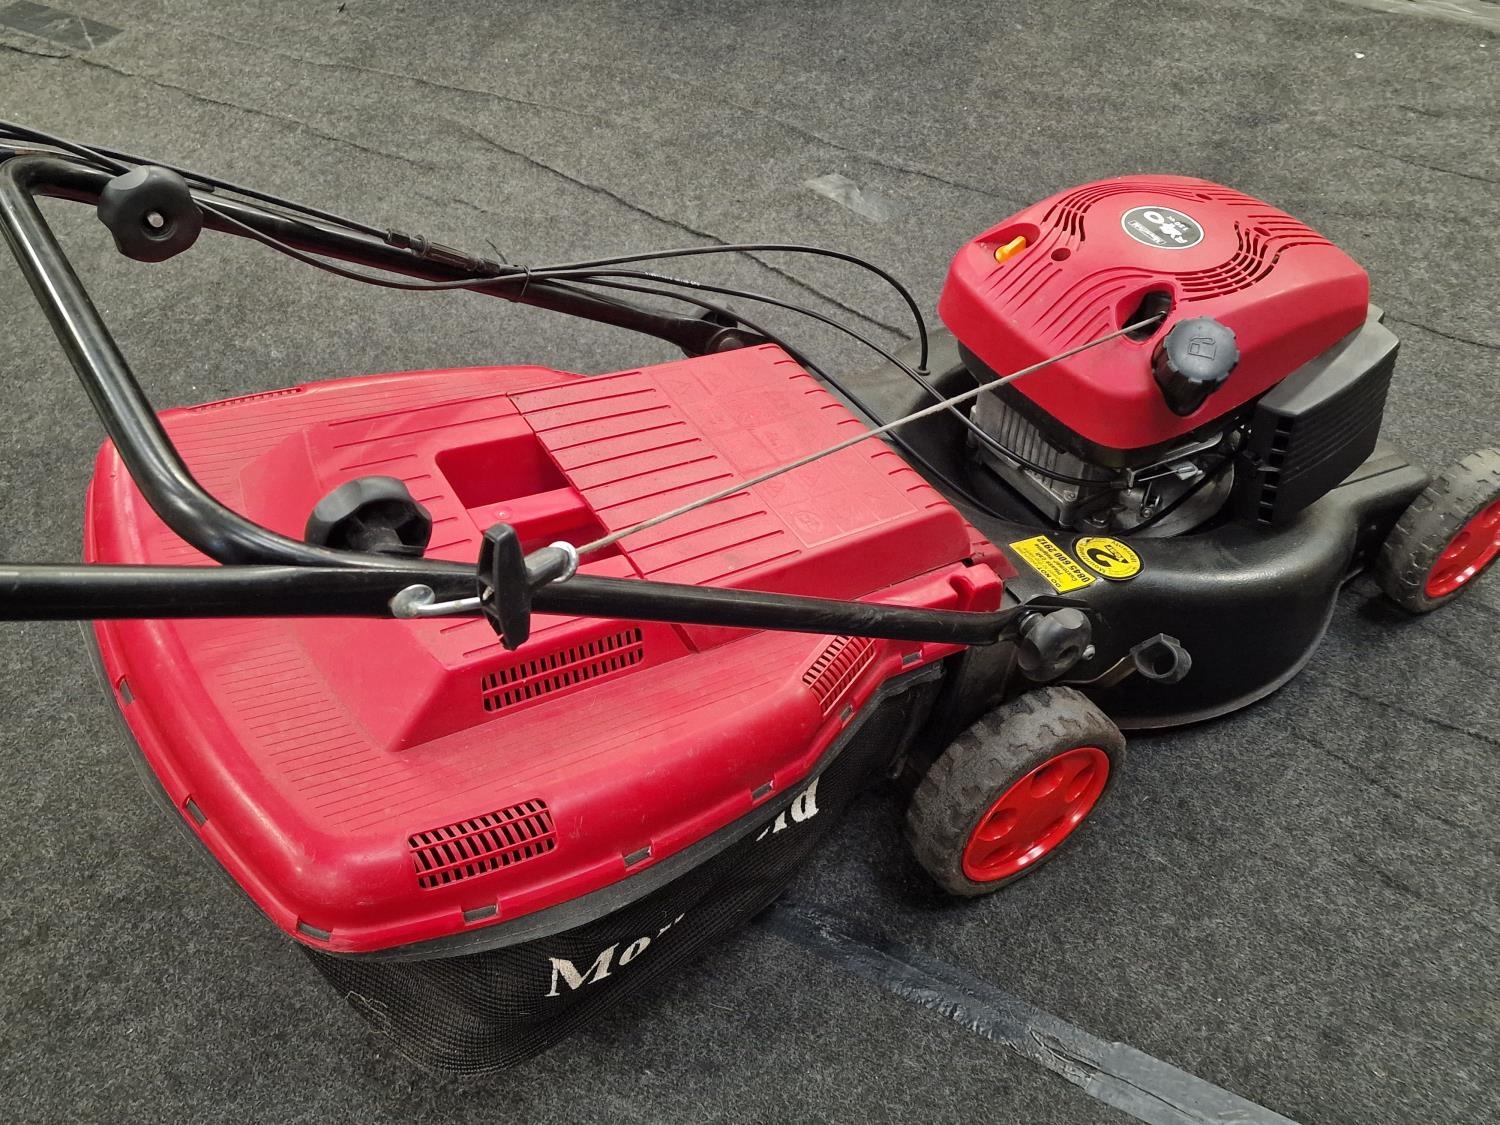 Mountfield "RV40" 150cc petrol lawn mower working at time of Cataloging - Image 3 of 3